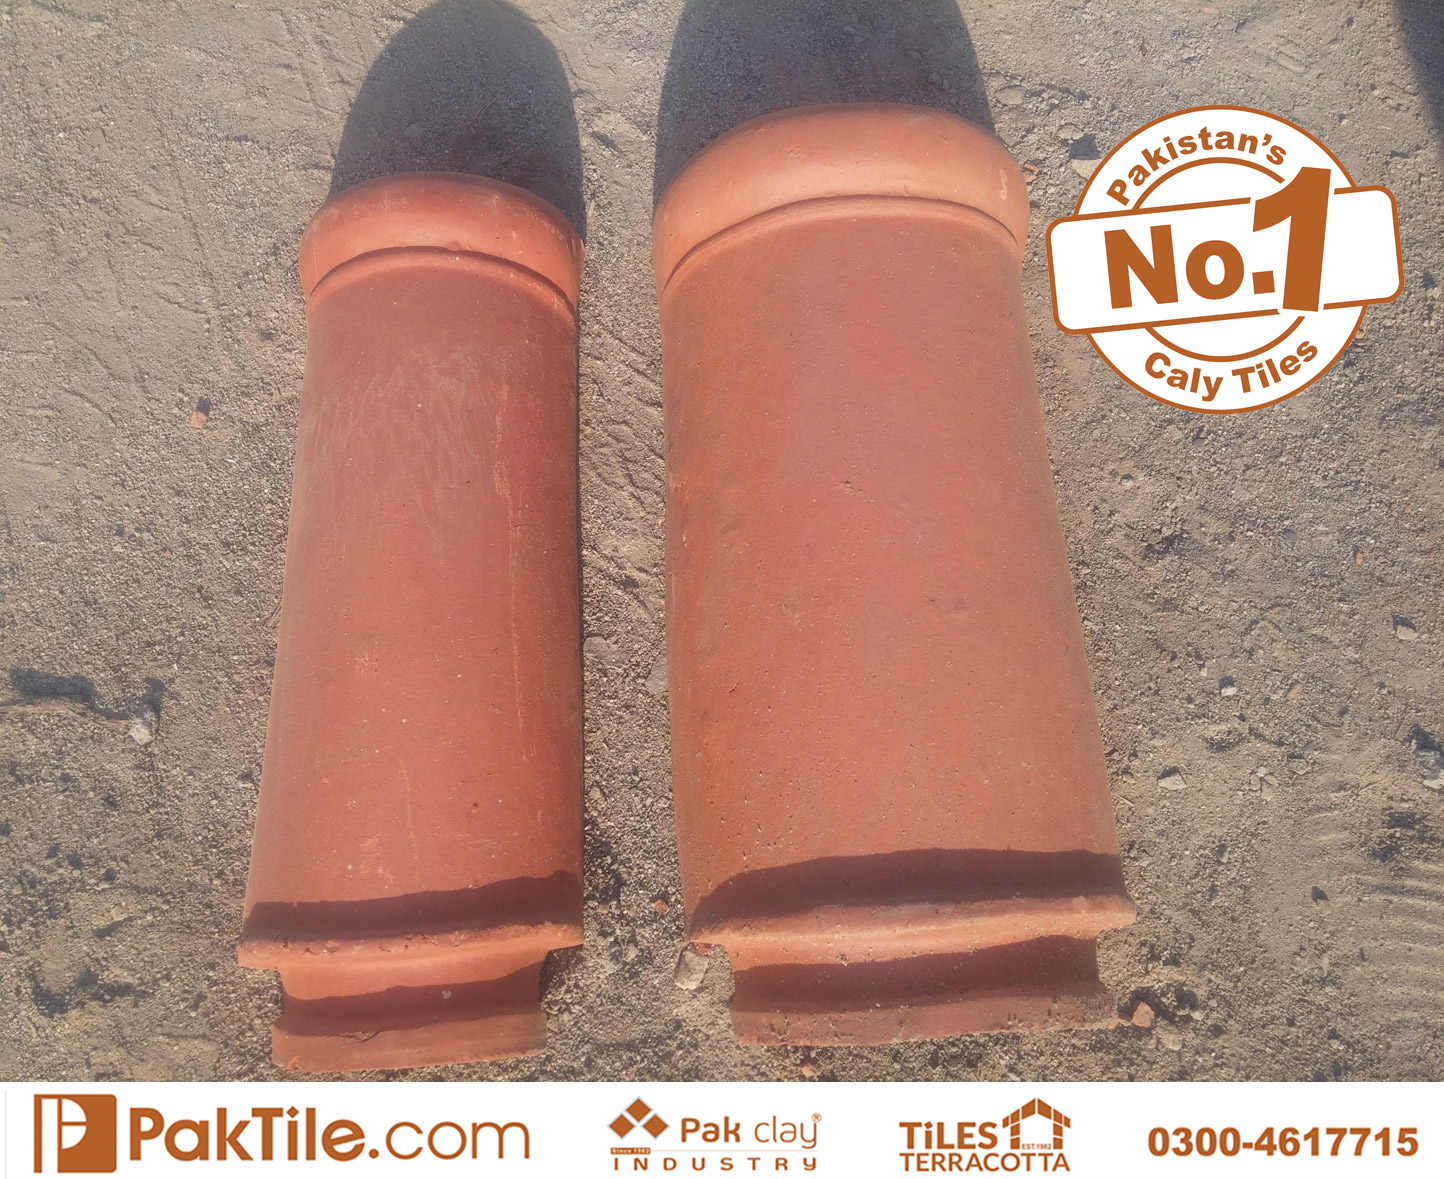 1 Barrel Size Big and Small Terracotta Slope Shed Mud Clay Roof Tiles Prices Khaprail Tiles in Faisalabad Pakistan